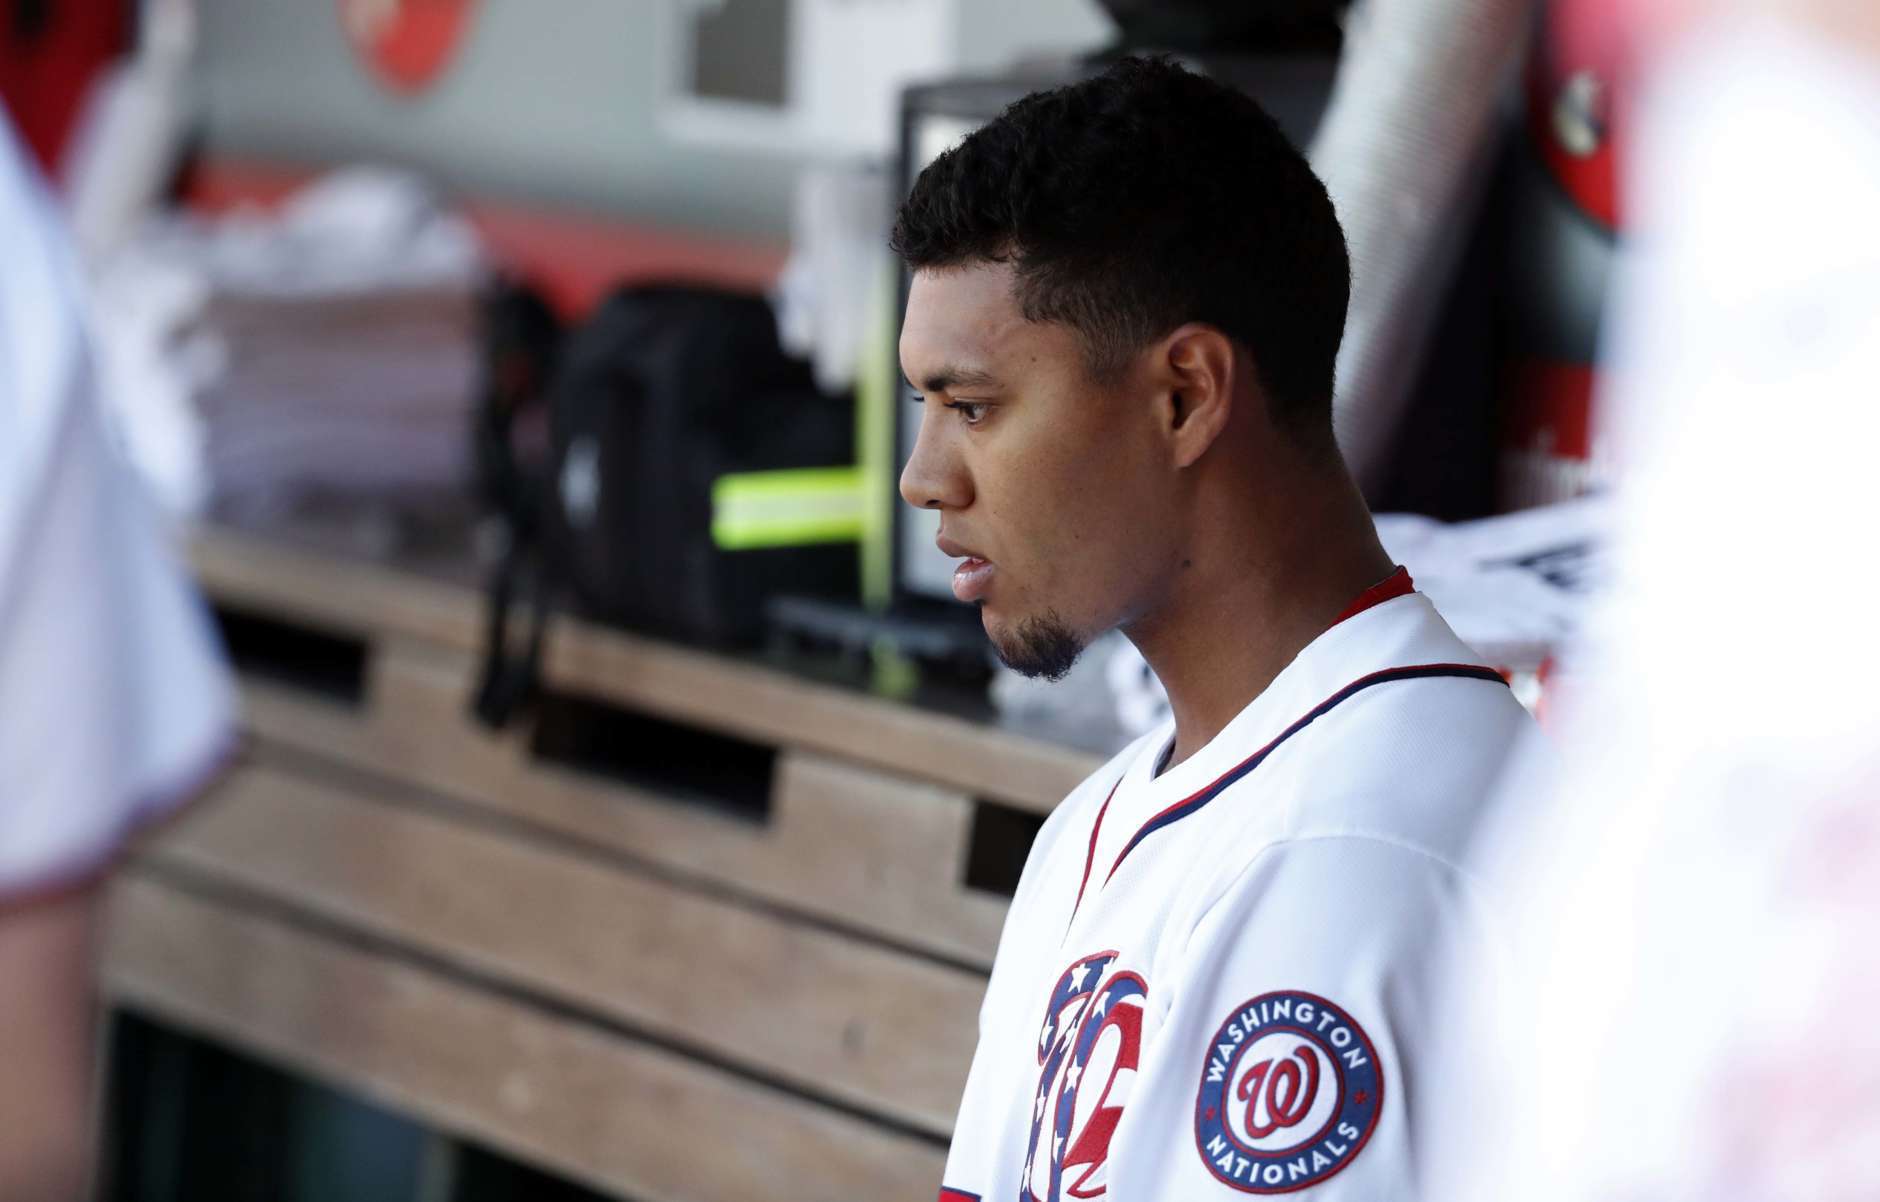 Washington Nationals starting pitcher Joe Ross (41) sits in the dugout before a baseball game against the Atlanta Braves at Nationals Park, Sunday, July 9, 2017, in Washington. (AP Photo/Alex Brandon)